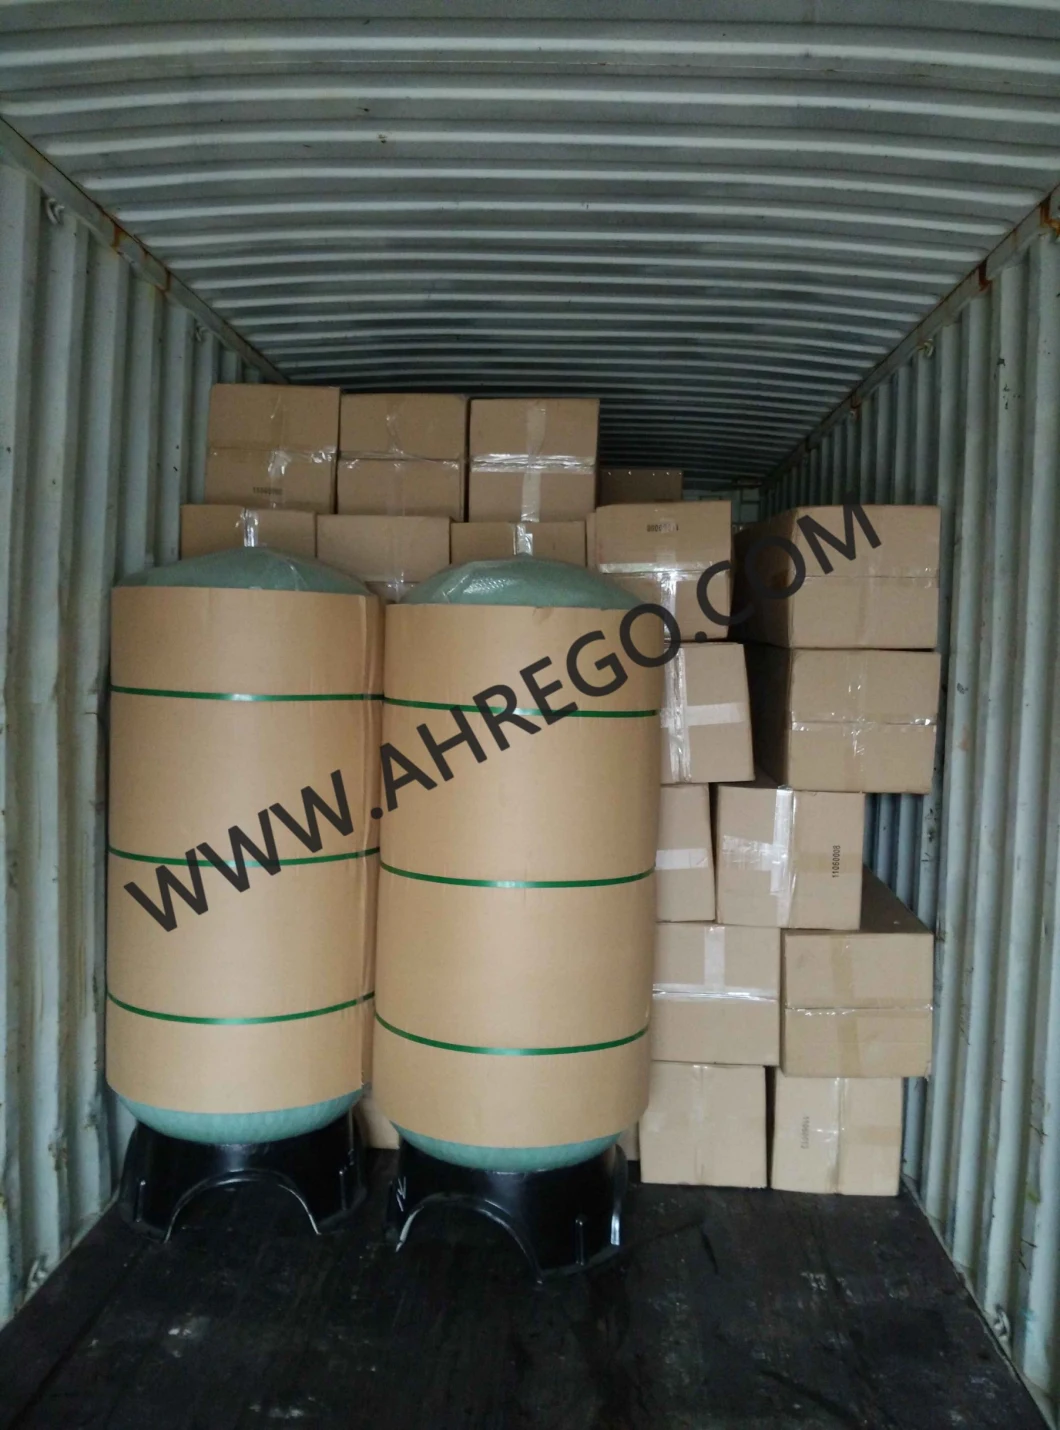 1354 FRP Tank for Water Filter System